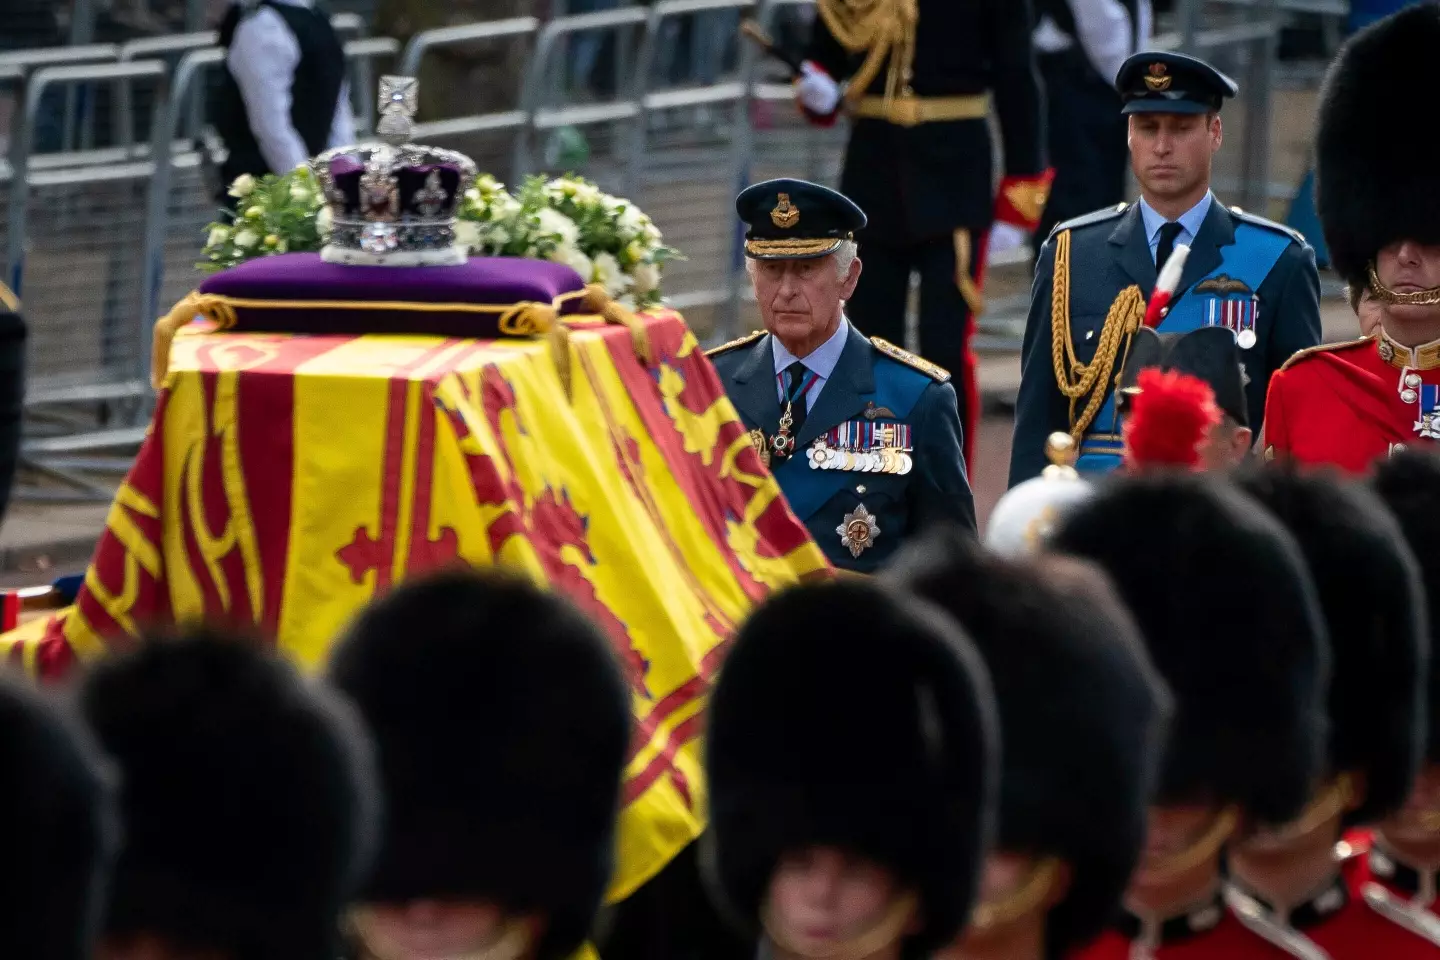 King Charles and Prince William following the Queen's coffin.